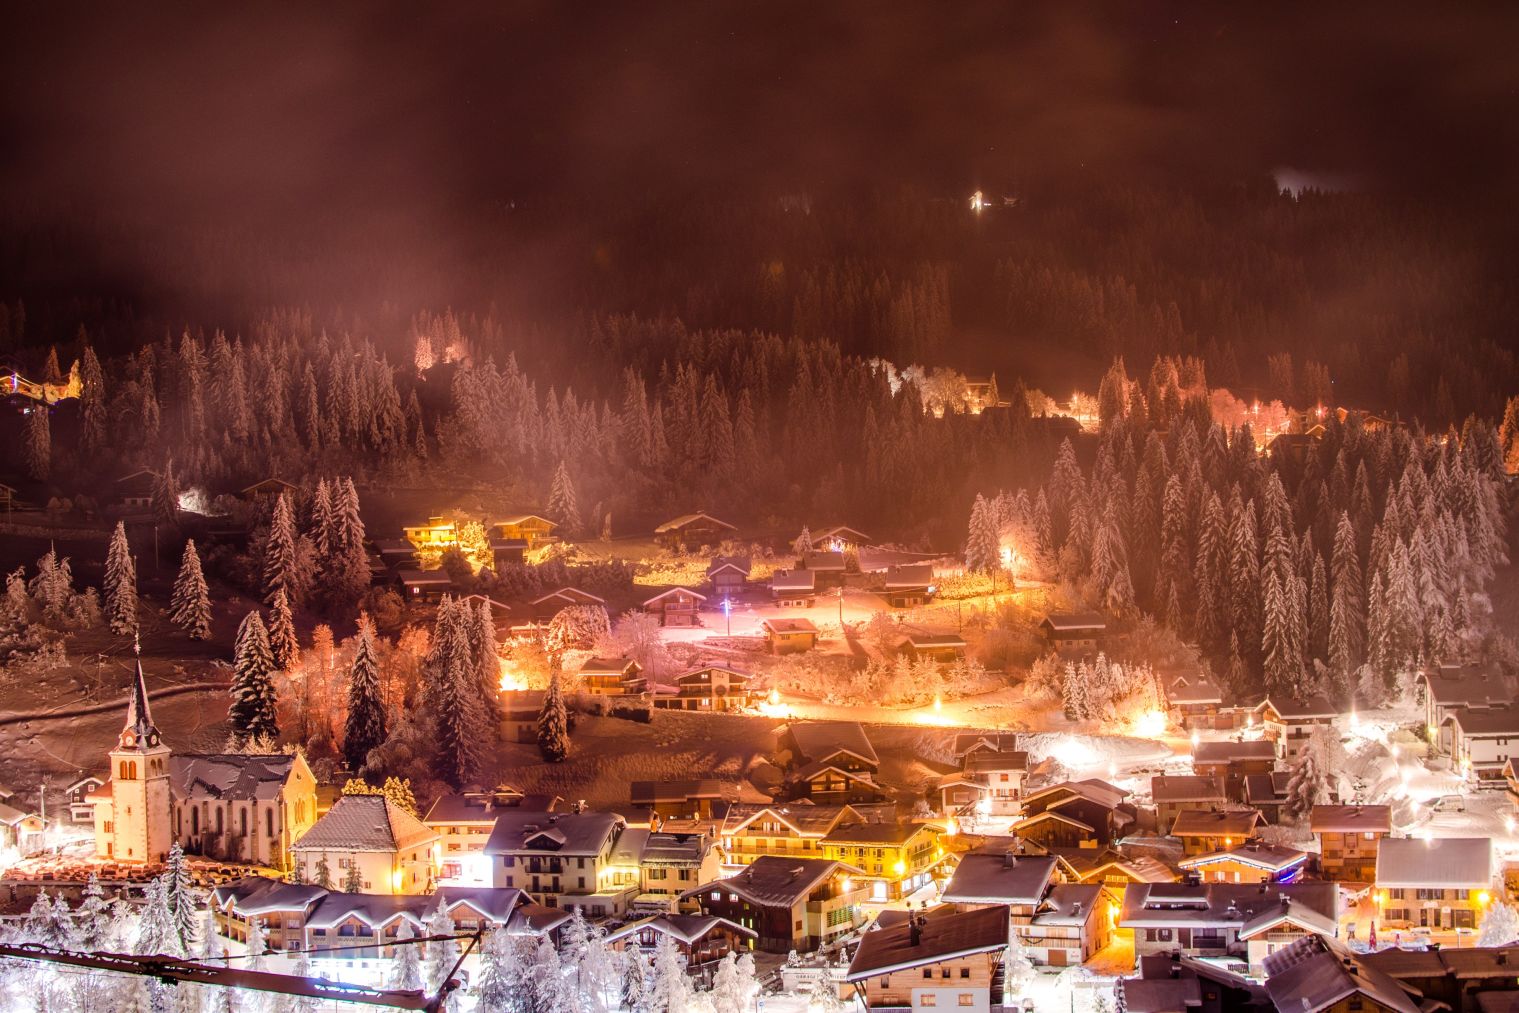 An amazing ski resort in mountains during a Christmas ski holiday 2023